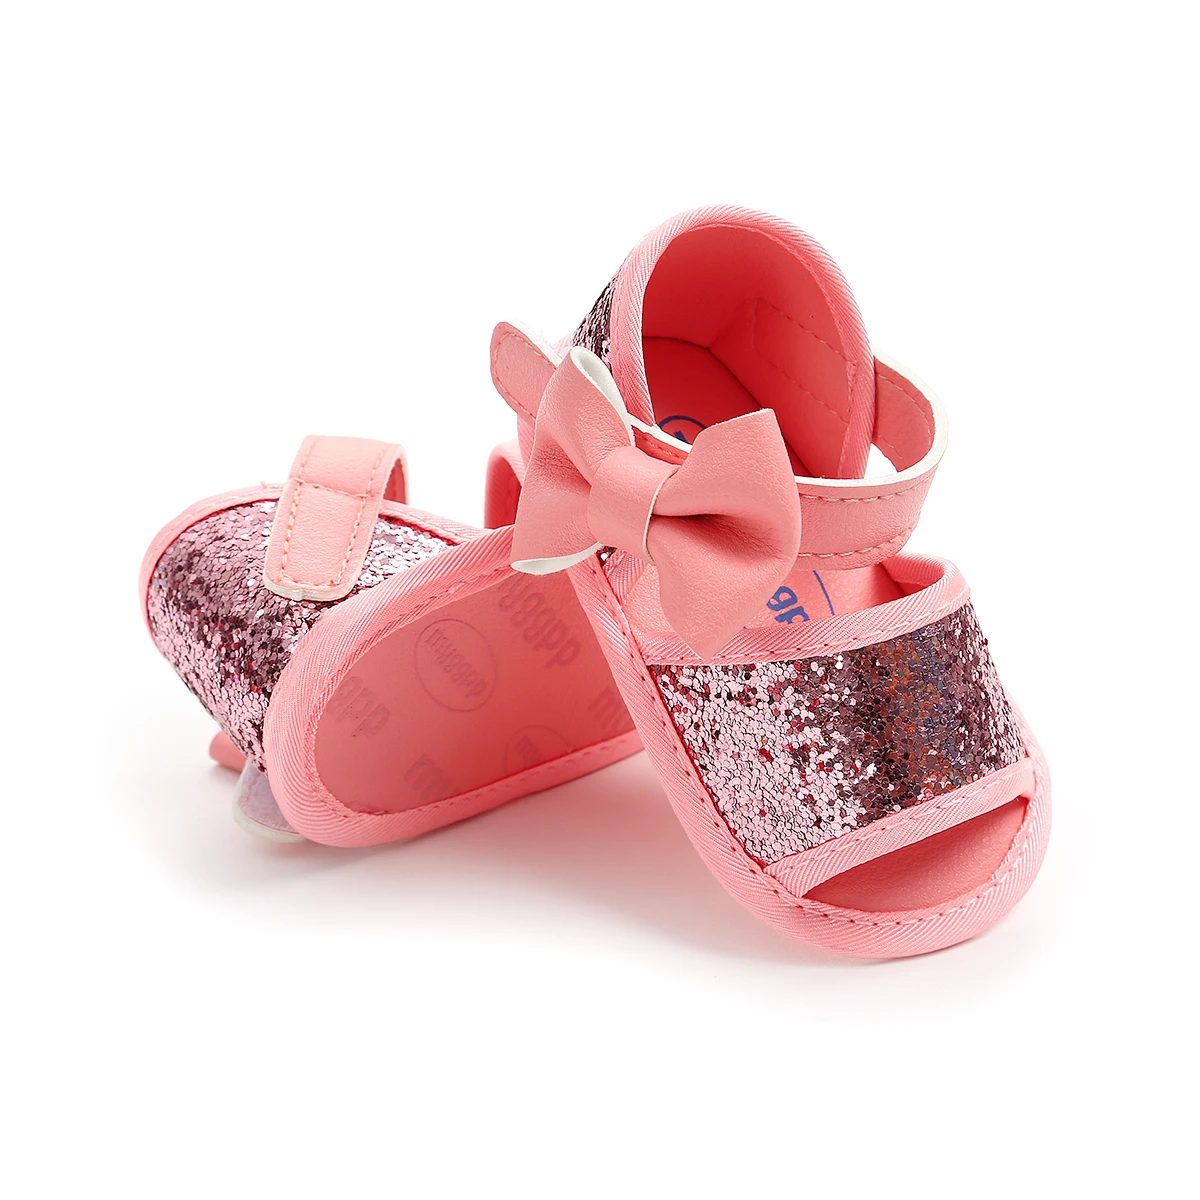 Baby Girl Sandals Big Bow Tie Decoration Baby Shoes Toddler Shining Sequin Non-Slip Sandals Kids Soft Crib Walkers Infant Shoes